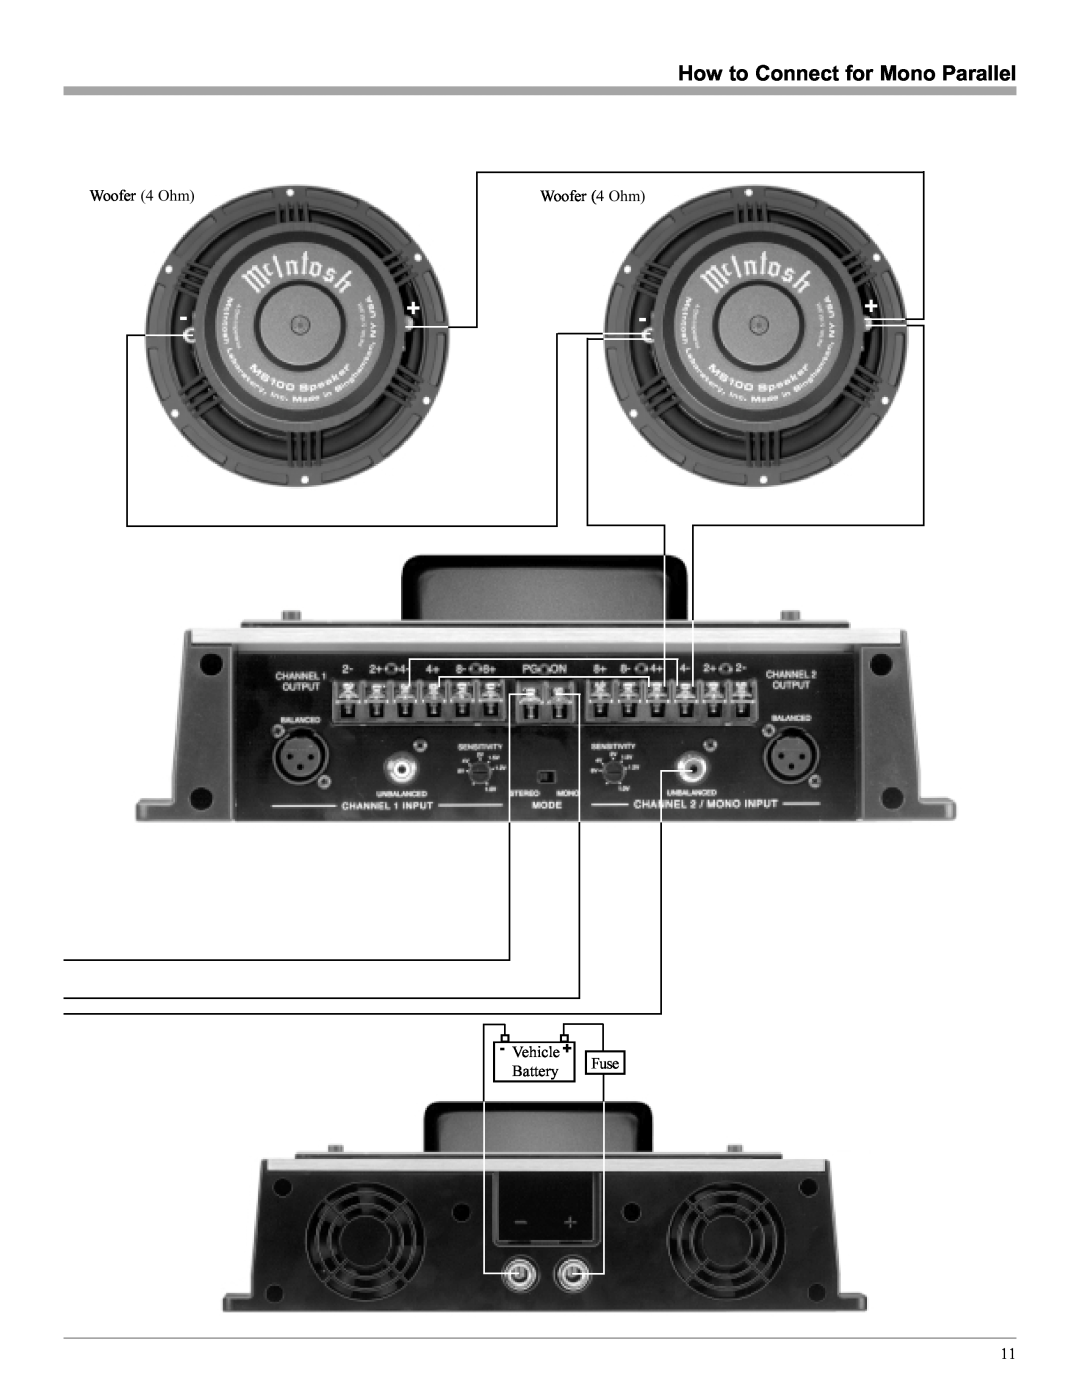 McIntosh MCC602TM manual How to Connect for Mono Parallel, Woofer 4 Ohm, Fuse, Vehicle + Battery 